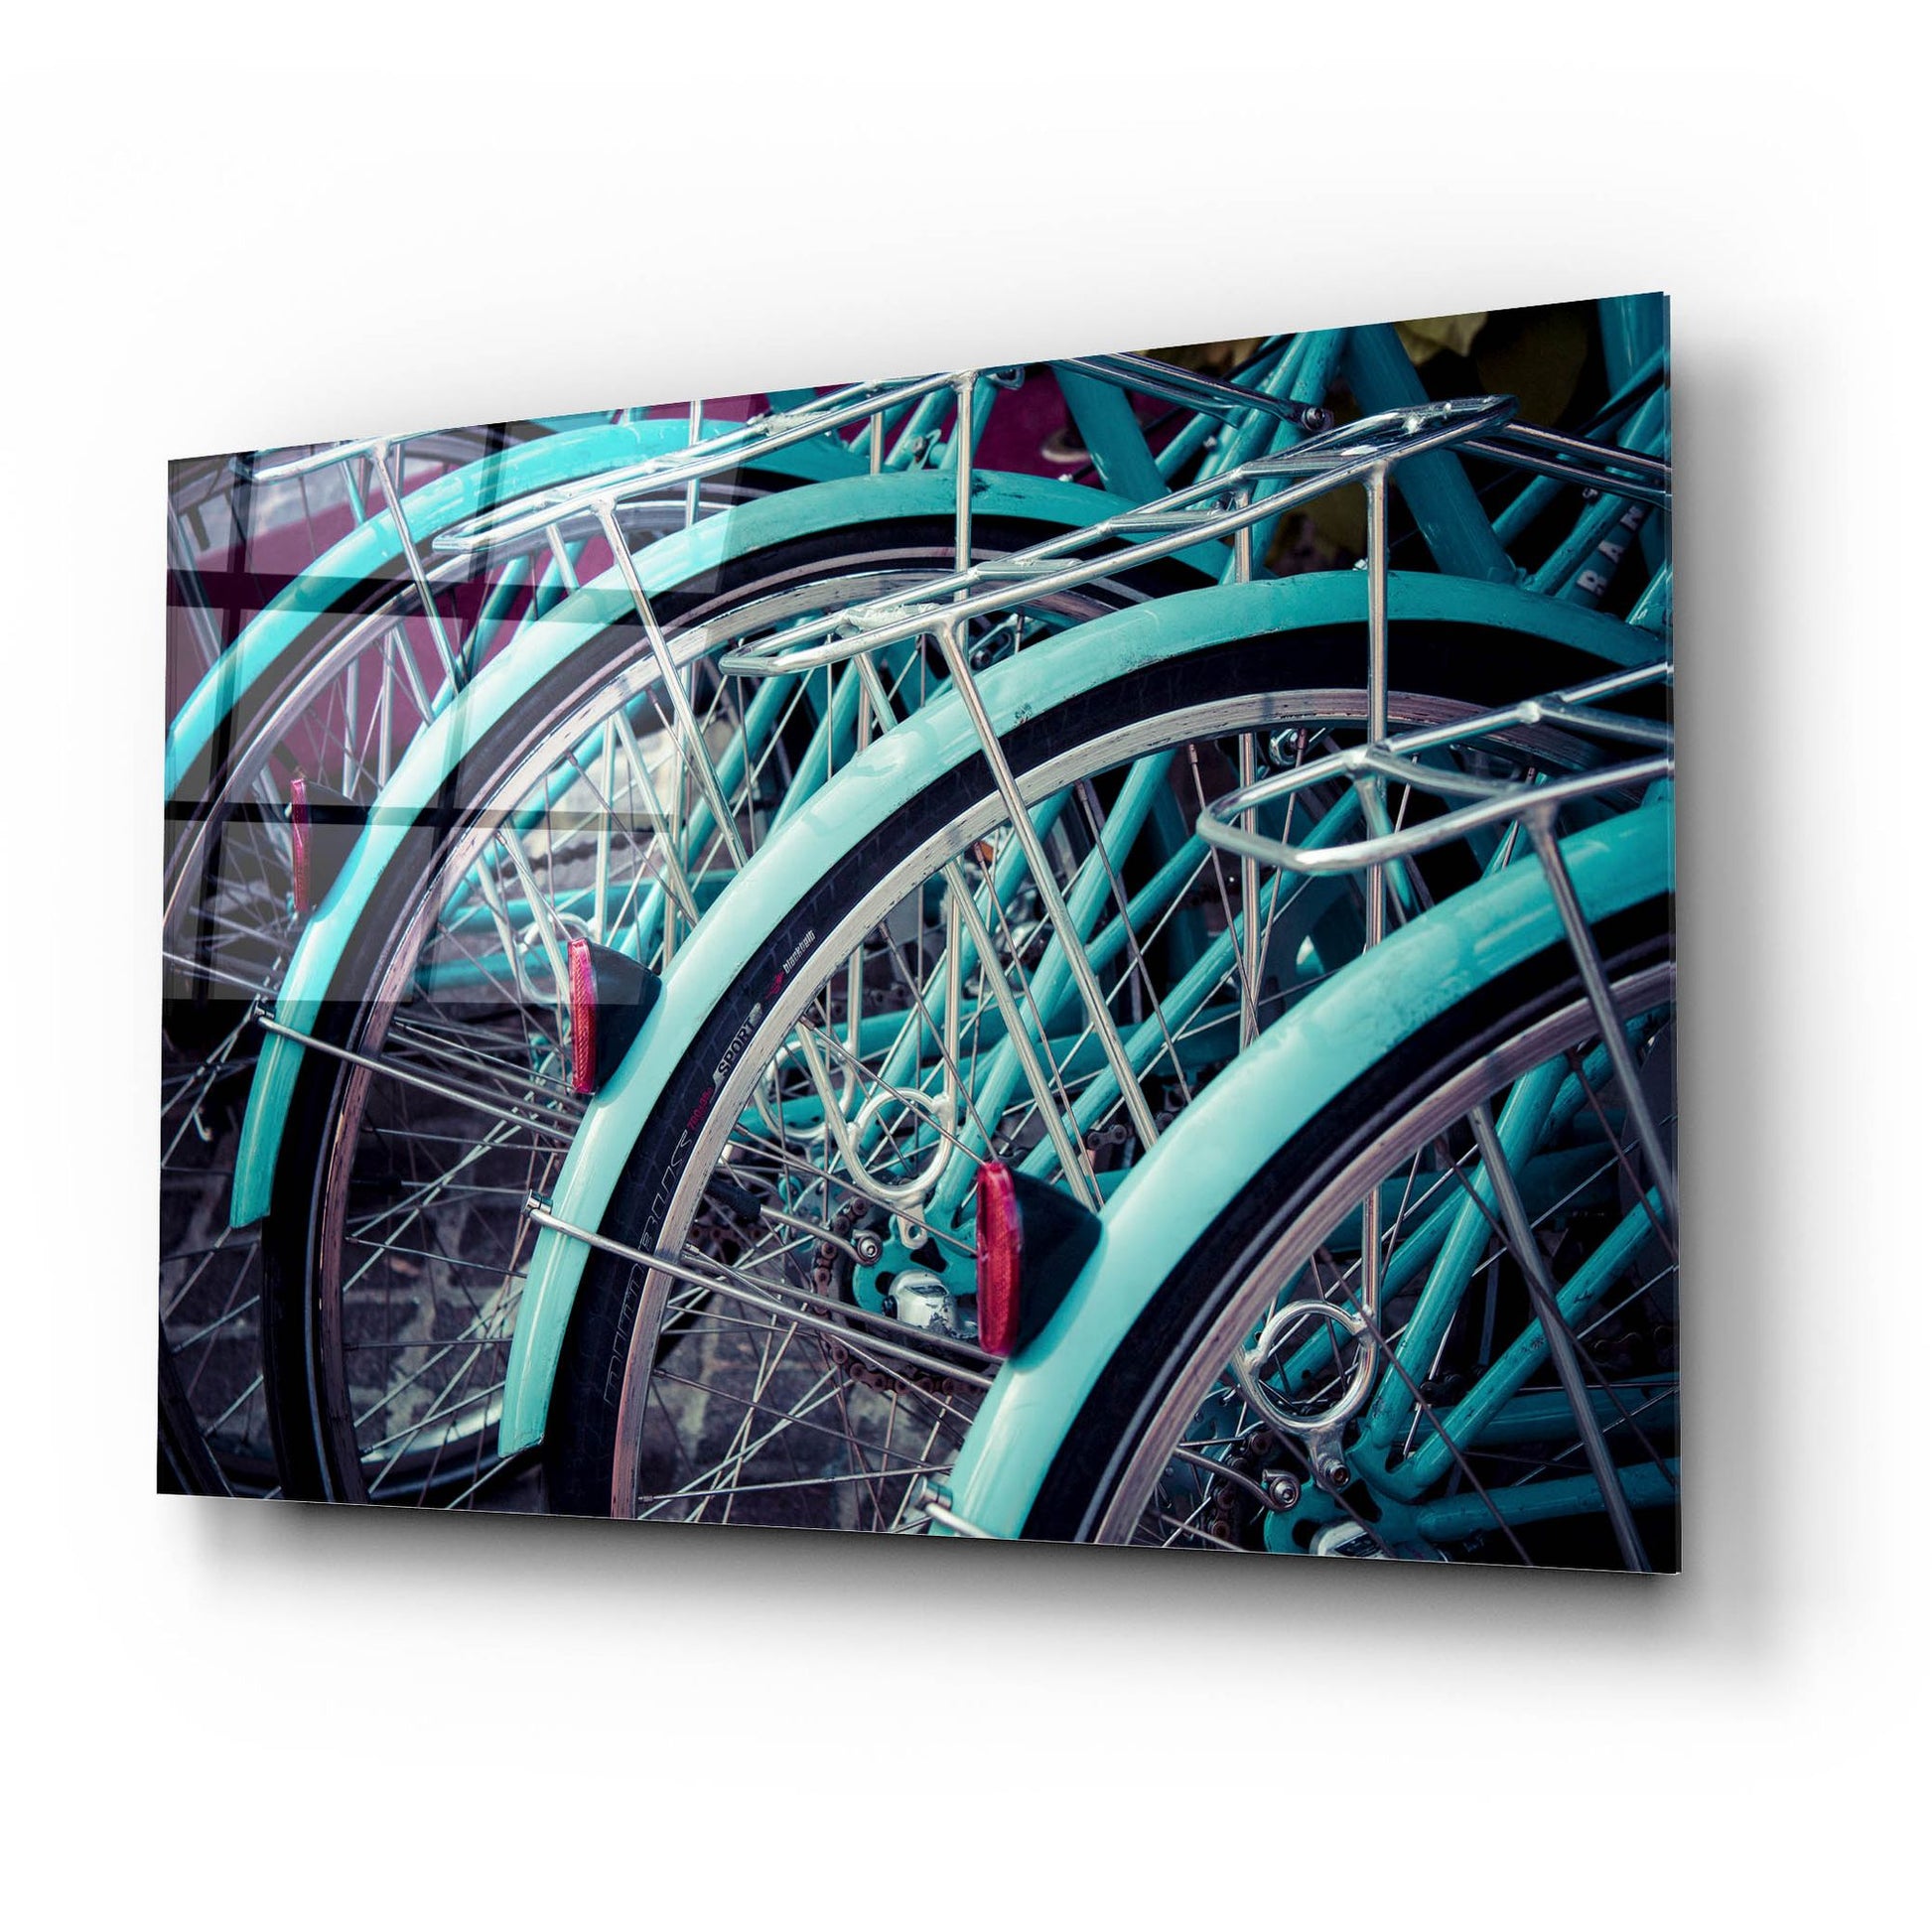 Epic Art ' Bicycle Line Up 2' by Jessica Reiss, Acrylic Glass Wall Art,24x16